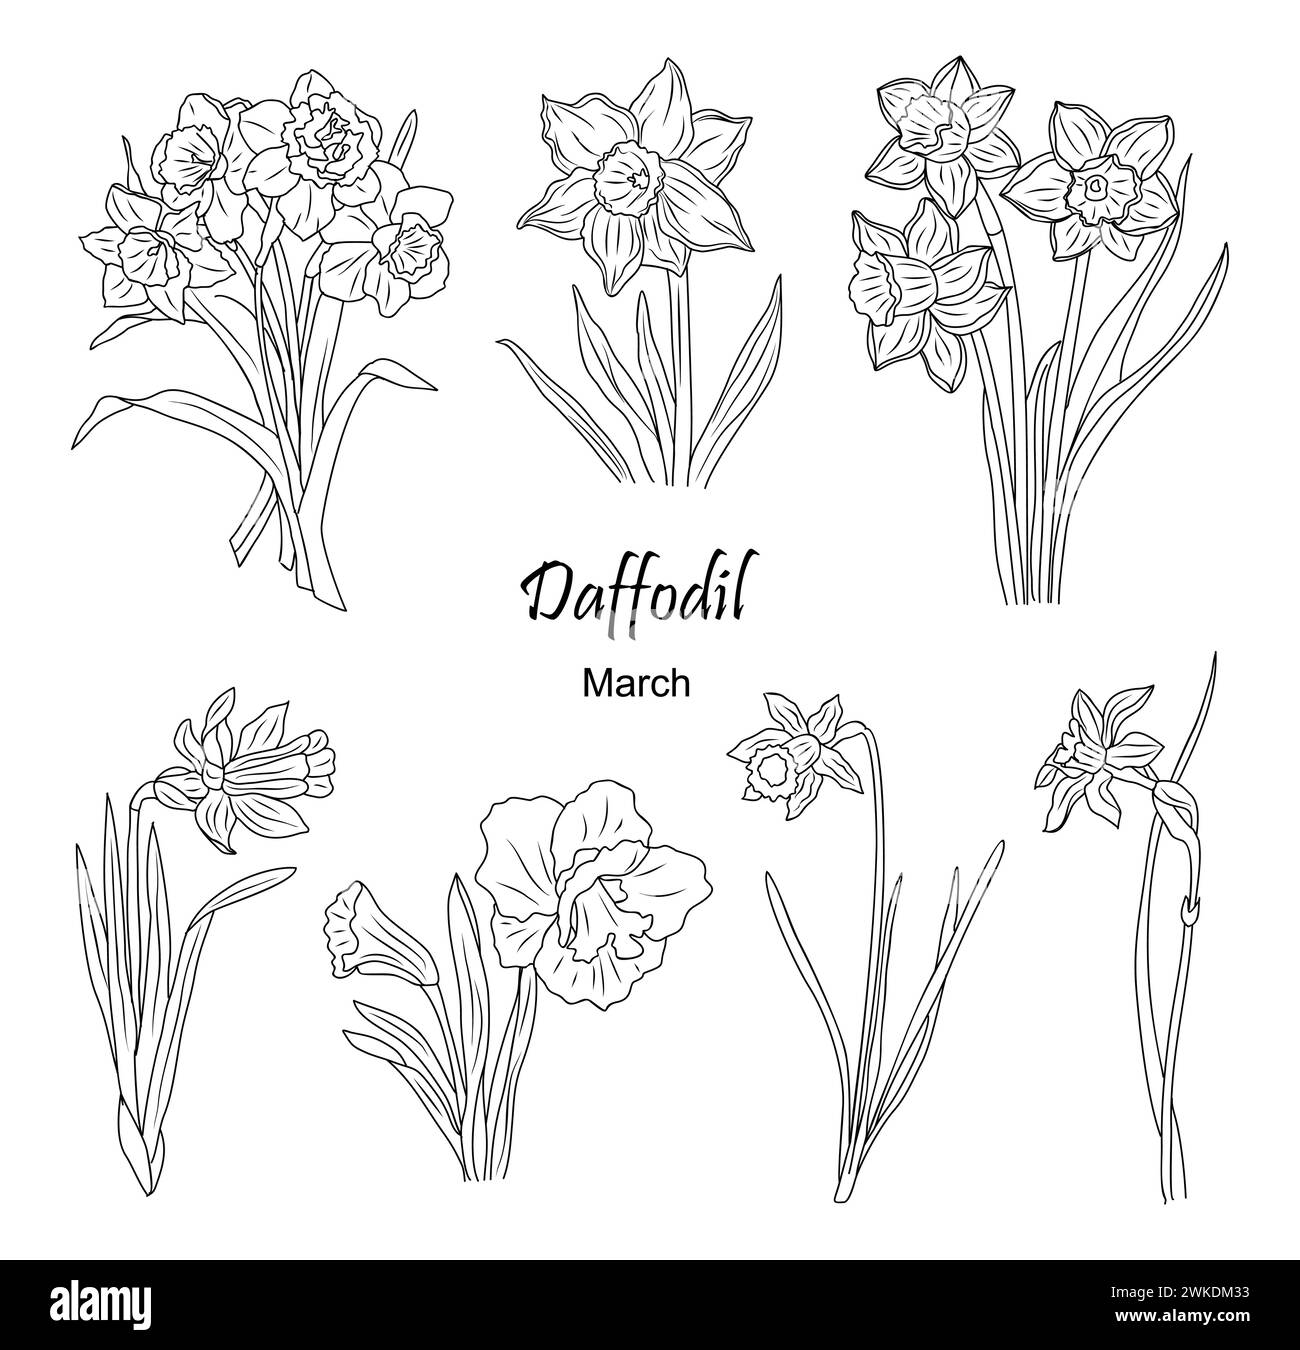 Daffodil March Birth month flower line art vector. Stock Vector